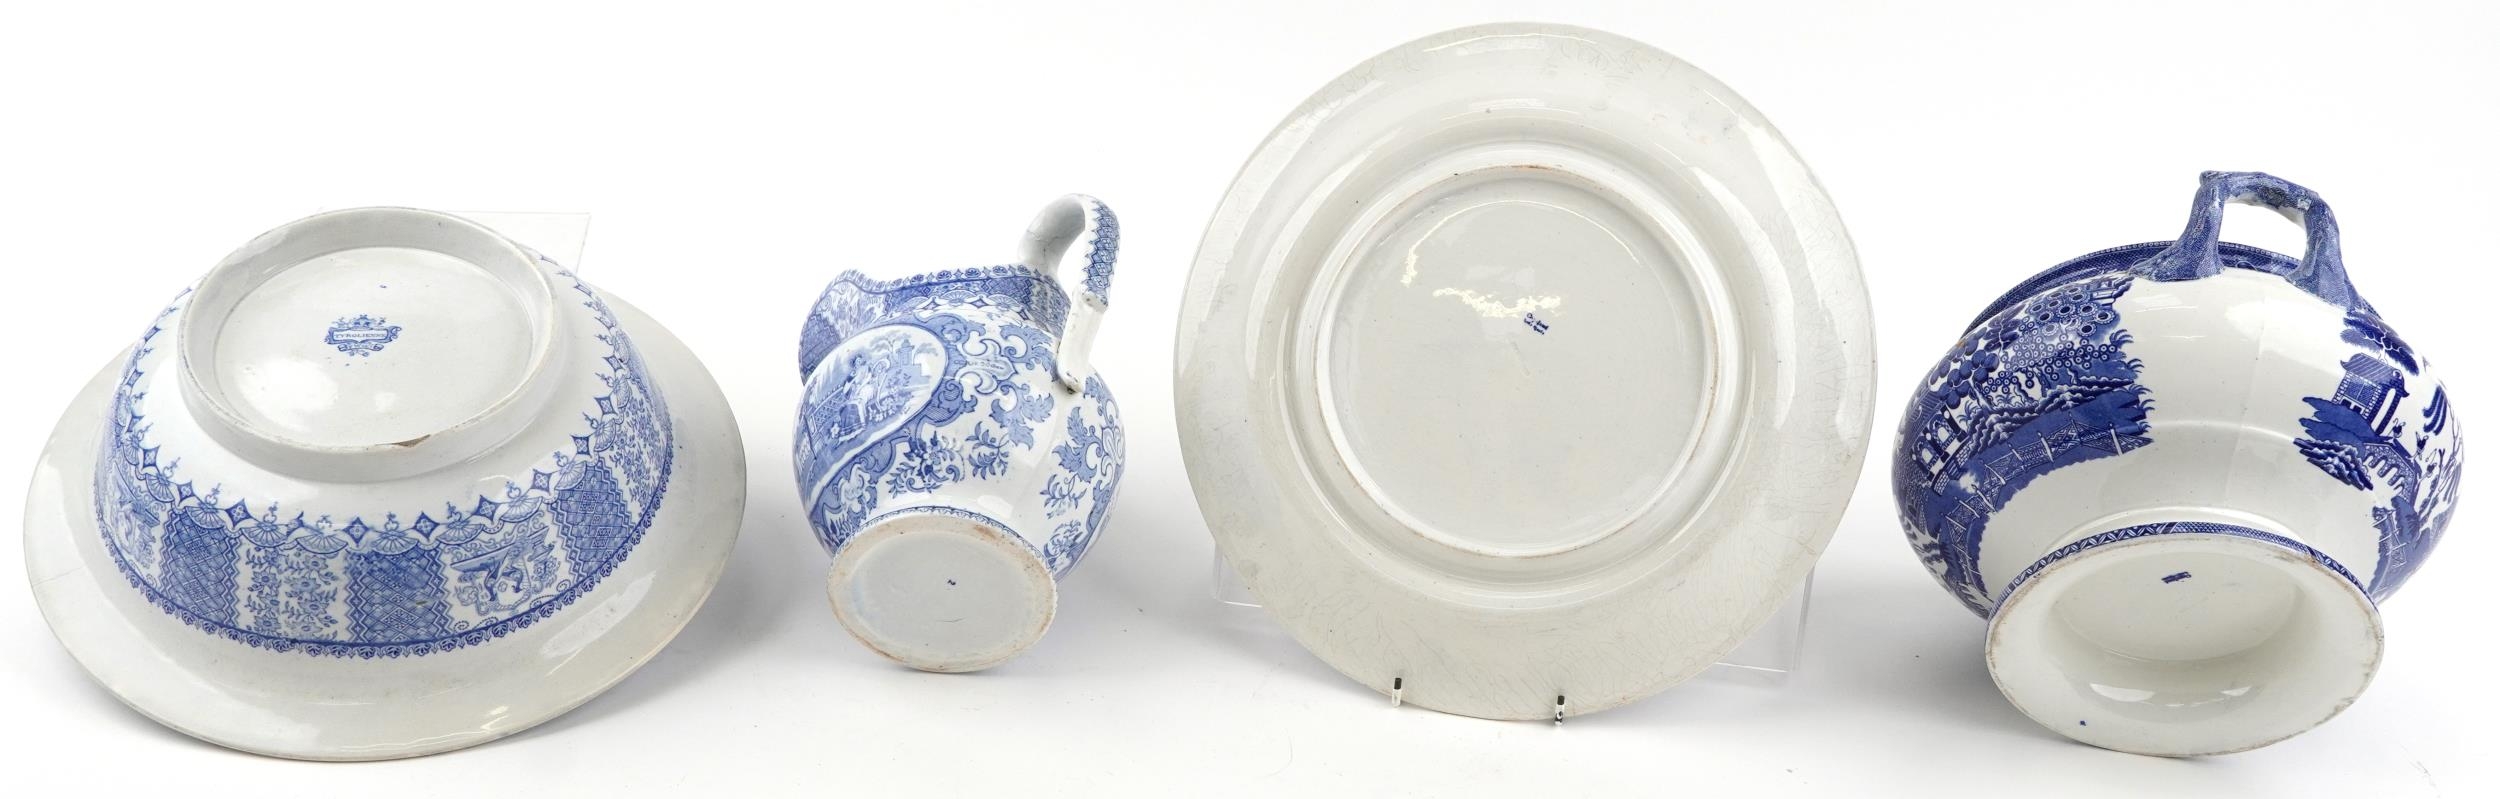 Victorian blue and white wash jug and basin, transfer printed in the Tyrolienne pattern and a - Image 9 of 10